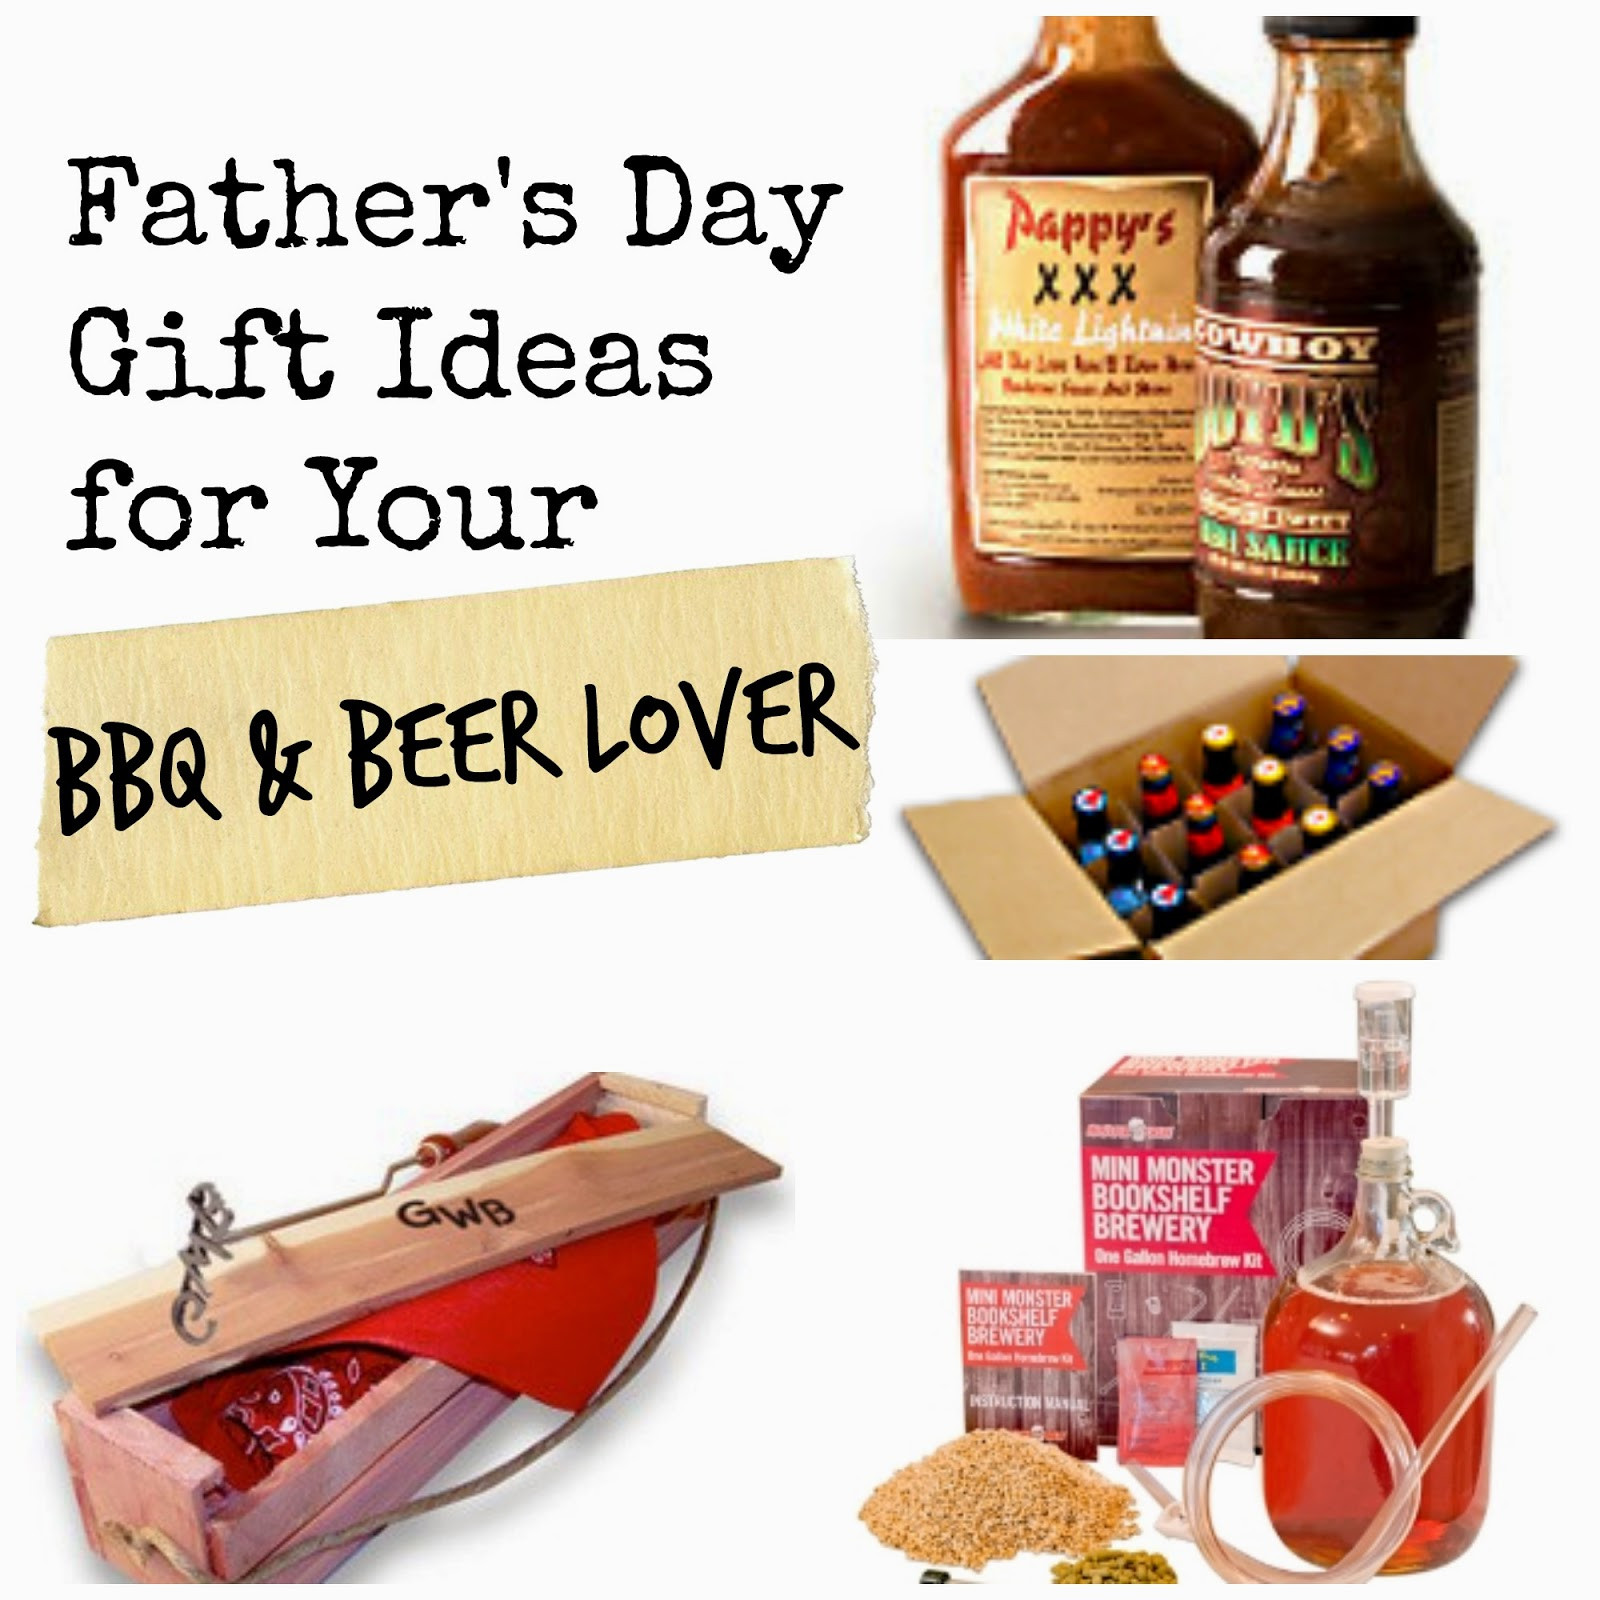 Father'S Day Gift Ideas Beer
 Father s Day Gifts For Your BBQ & Beer Lover